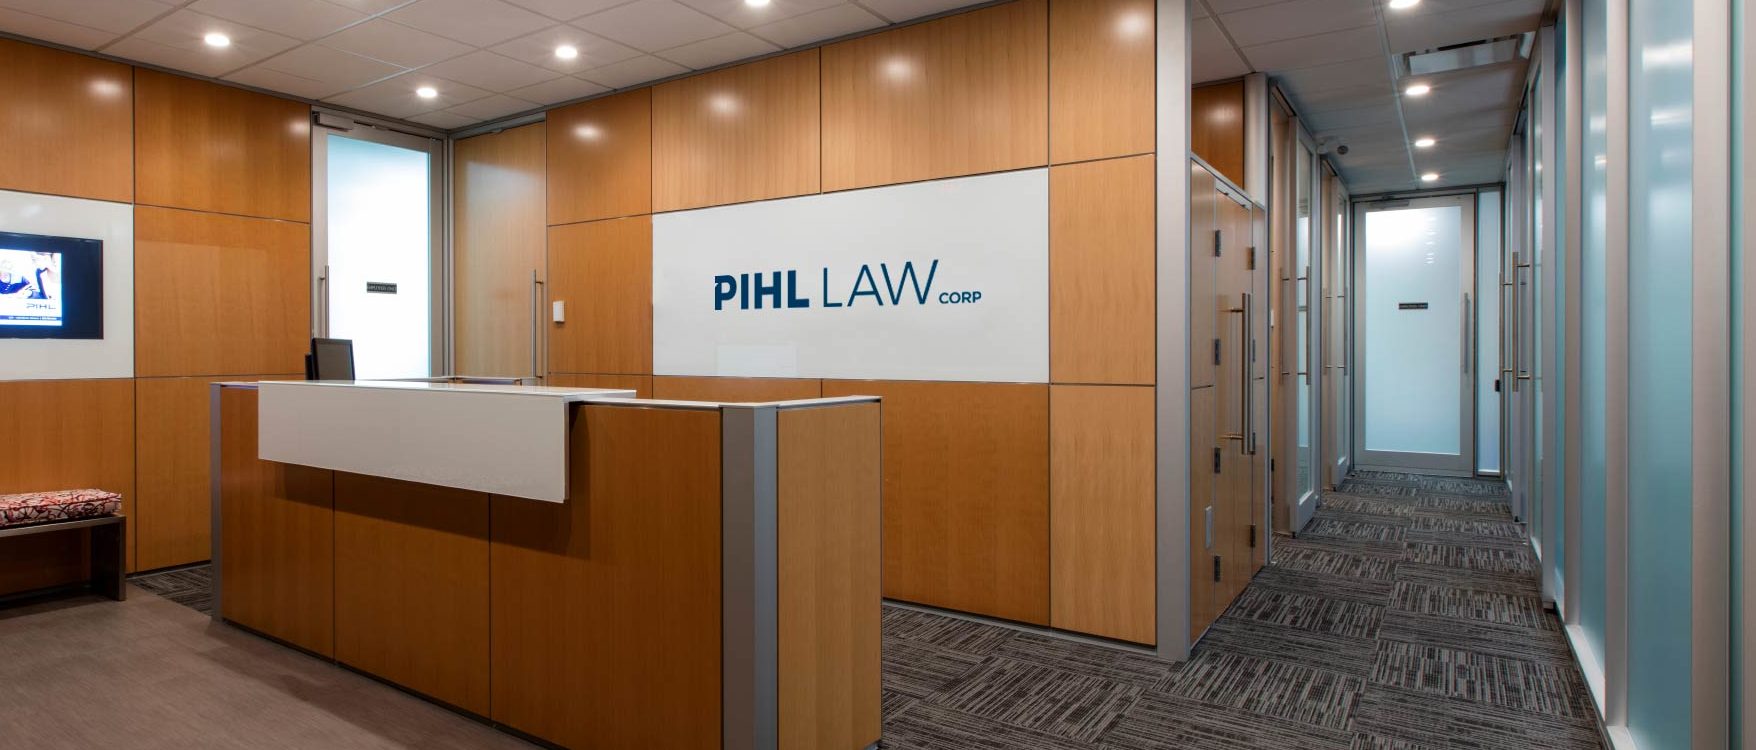 Pihl Law office interior shot with logo sign and reception desk